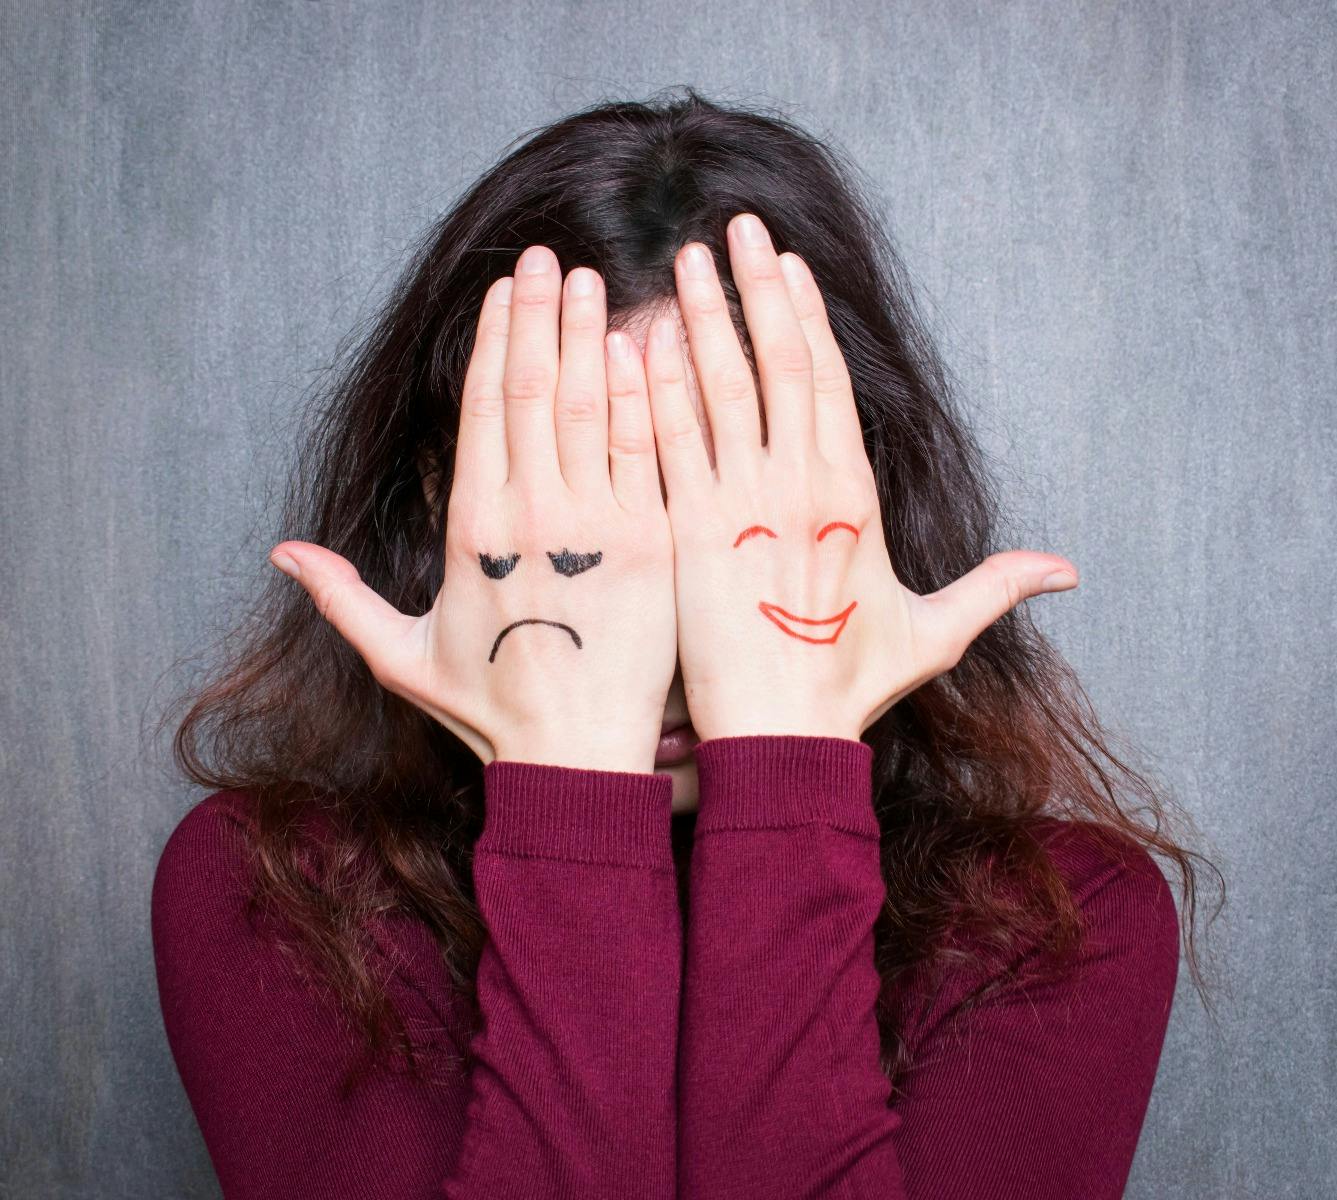 Woman covering her face with her hands. One hand has a happy face and one hand has an angry face.